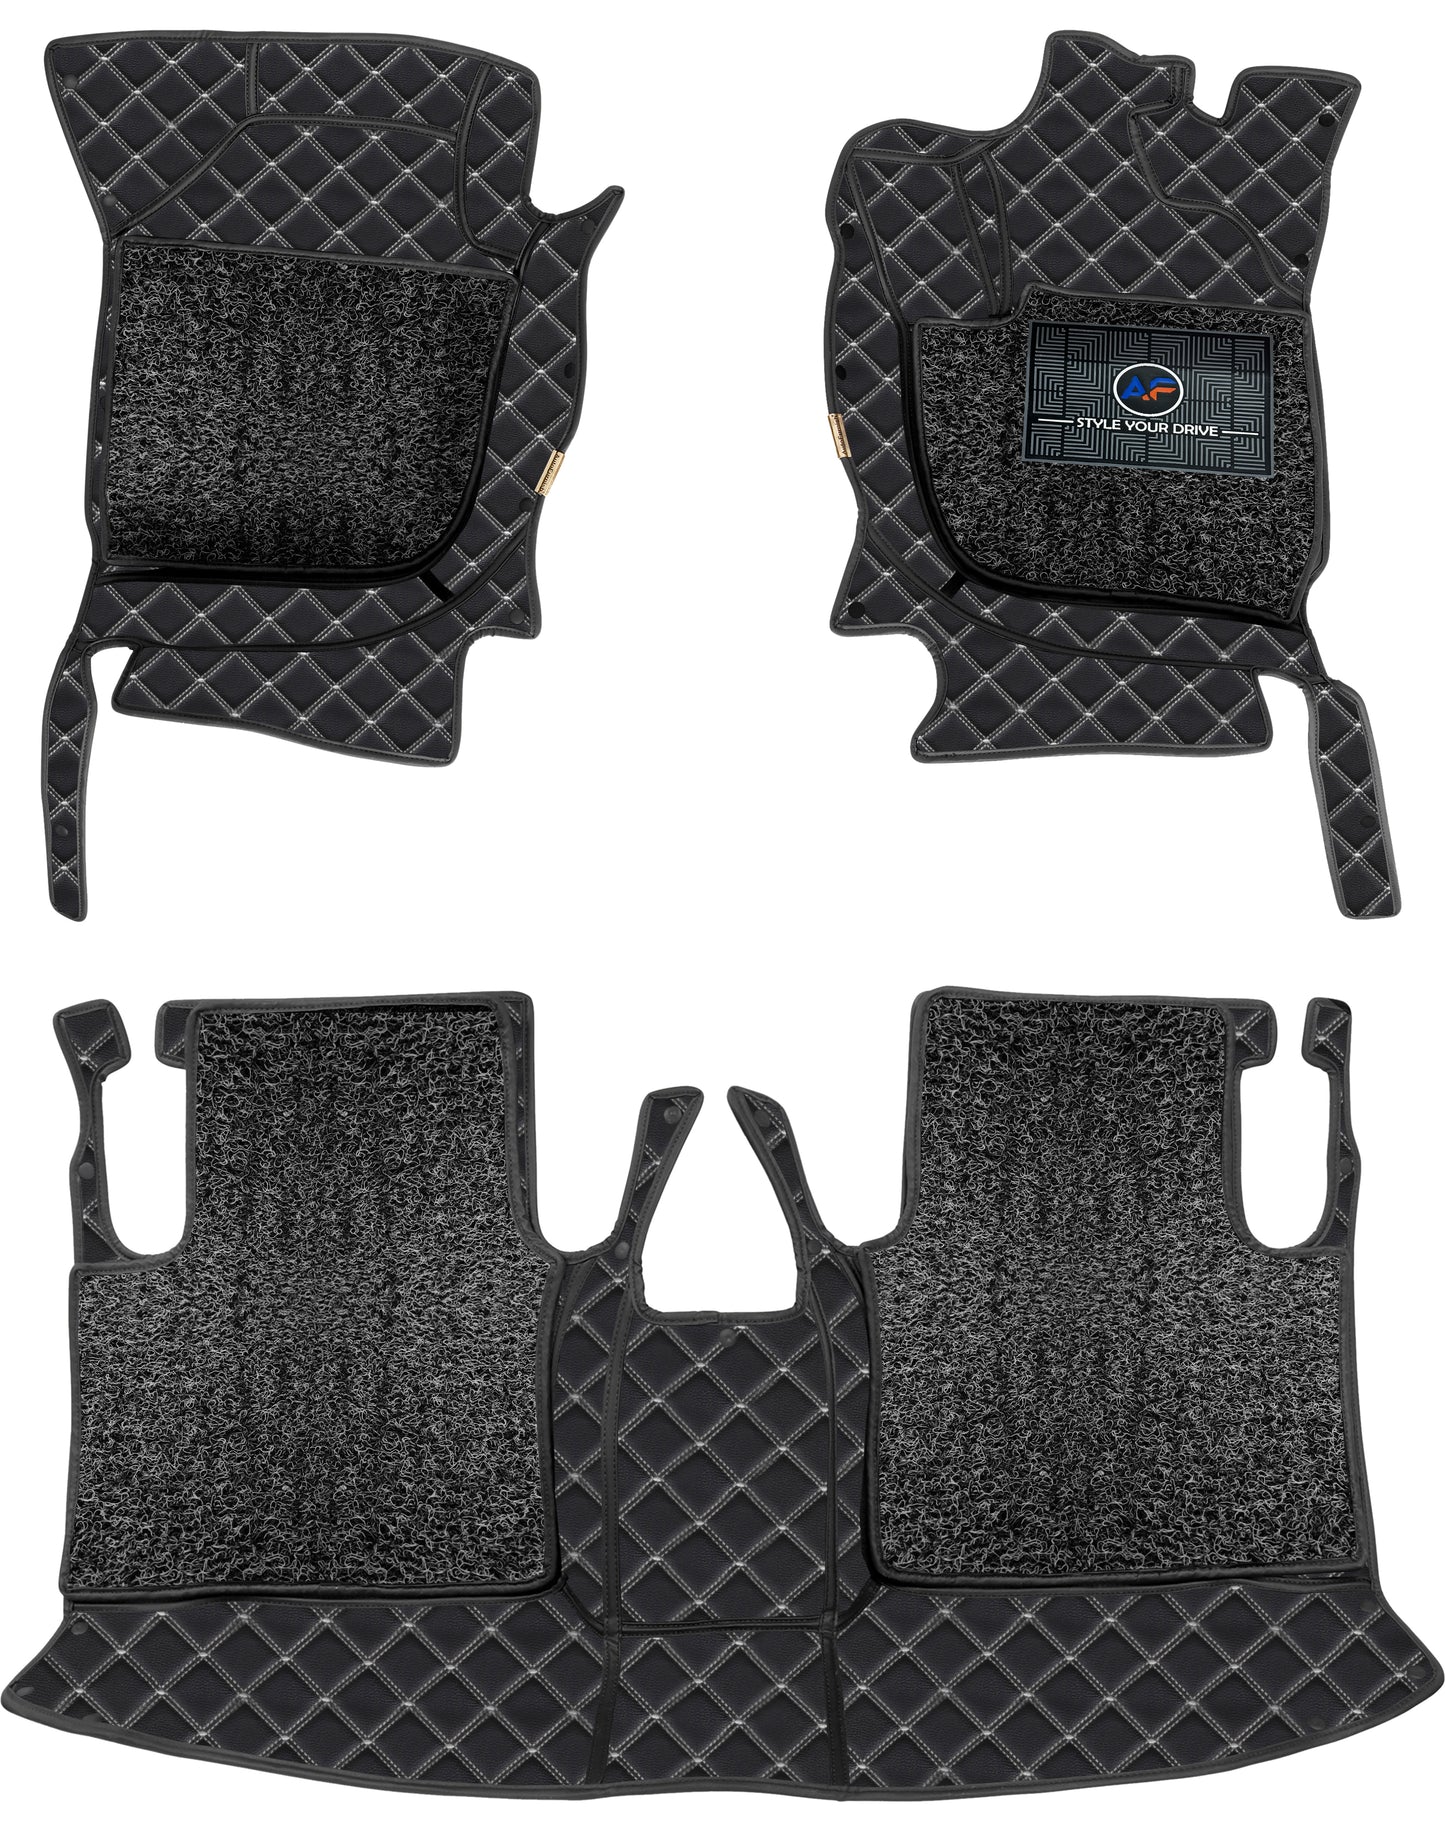 Porsche Cayenne 2014-16-7D Luxury Car Mat, All Weather Proof, Anti-Skid, 100% Waterproof & Odorless with Unique Diamond Fish Design (24mm Luxury PU Leather, 2 Rows)